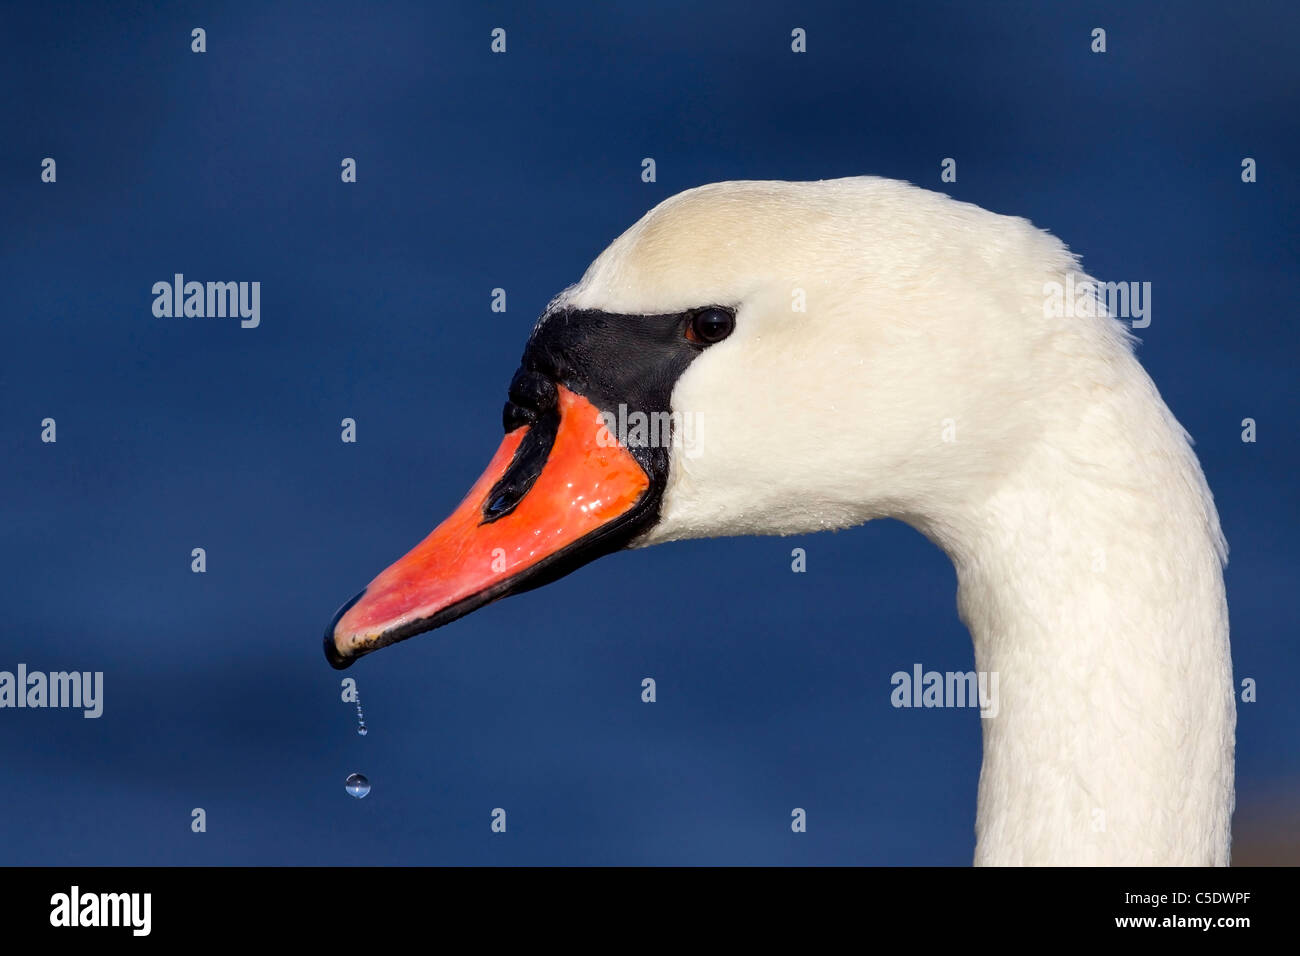 Close-up side view of a mute swan against blurred blue background Stock Photo